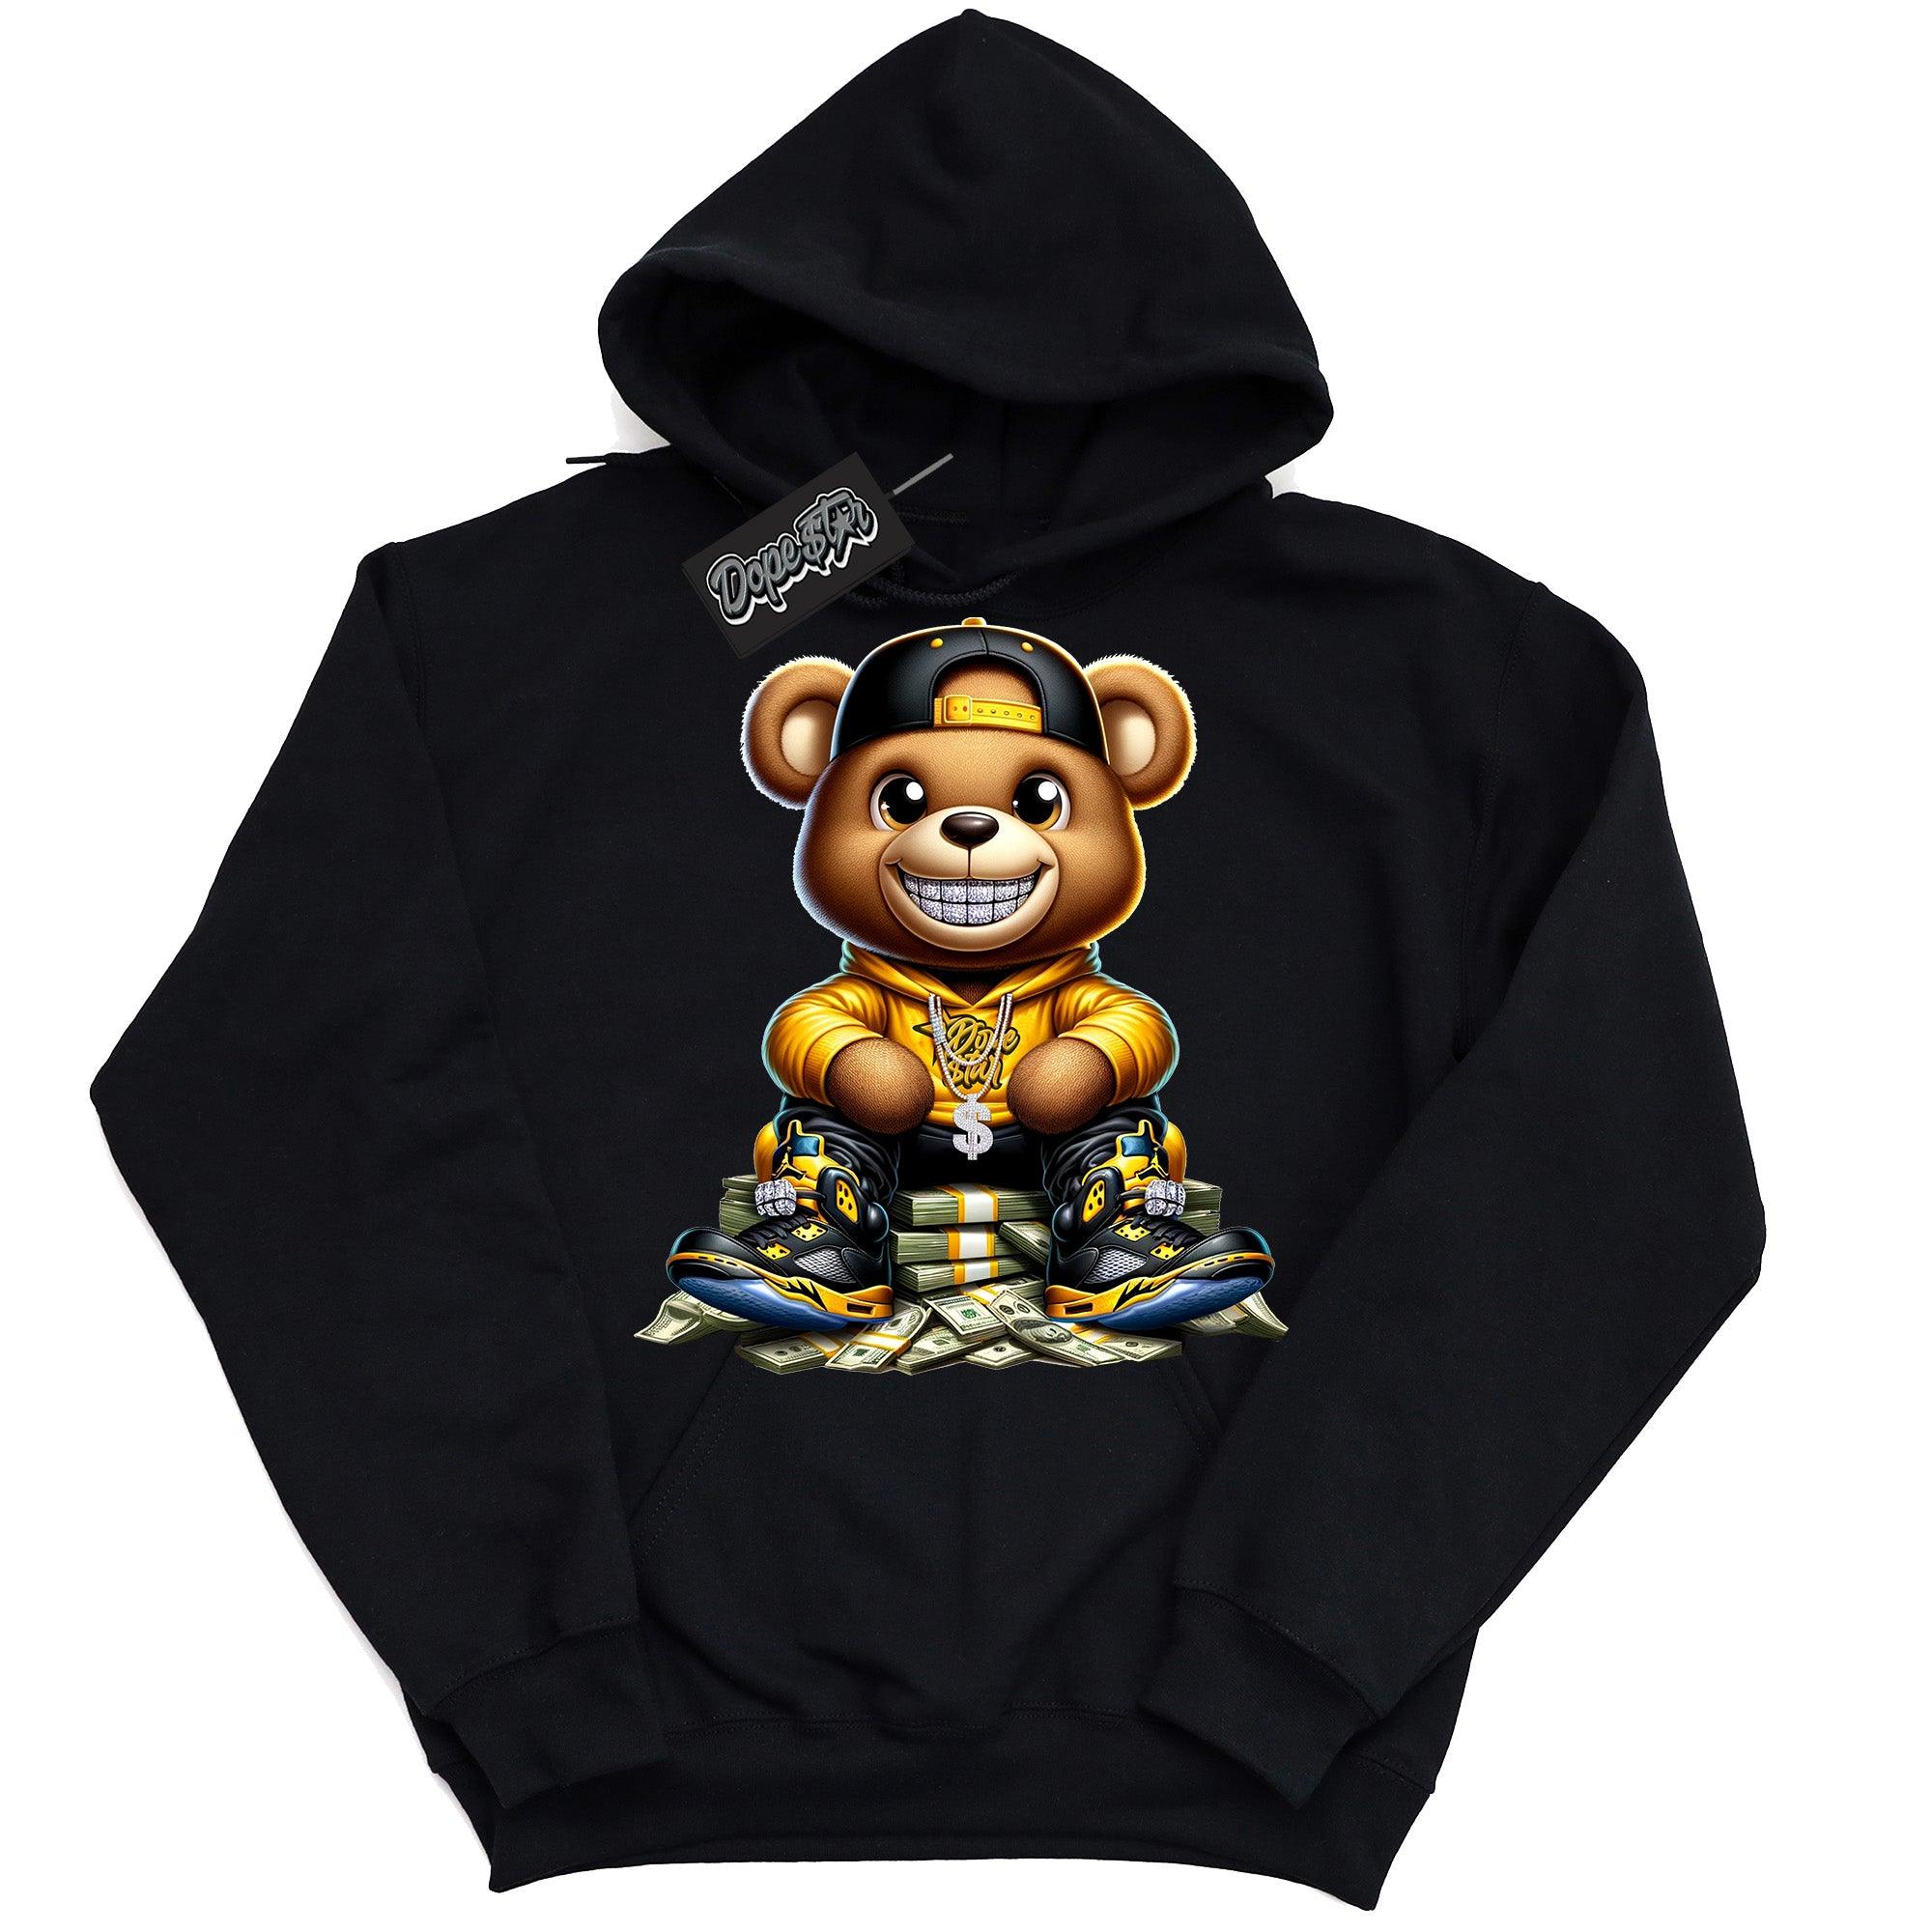 Cool Black Graphic Hoodie with “ Dope Star Bear “ print, that perfectly matches Air Jordan 12 BLACK TAXI sneakers